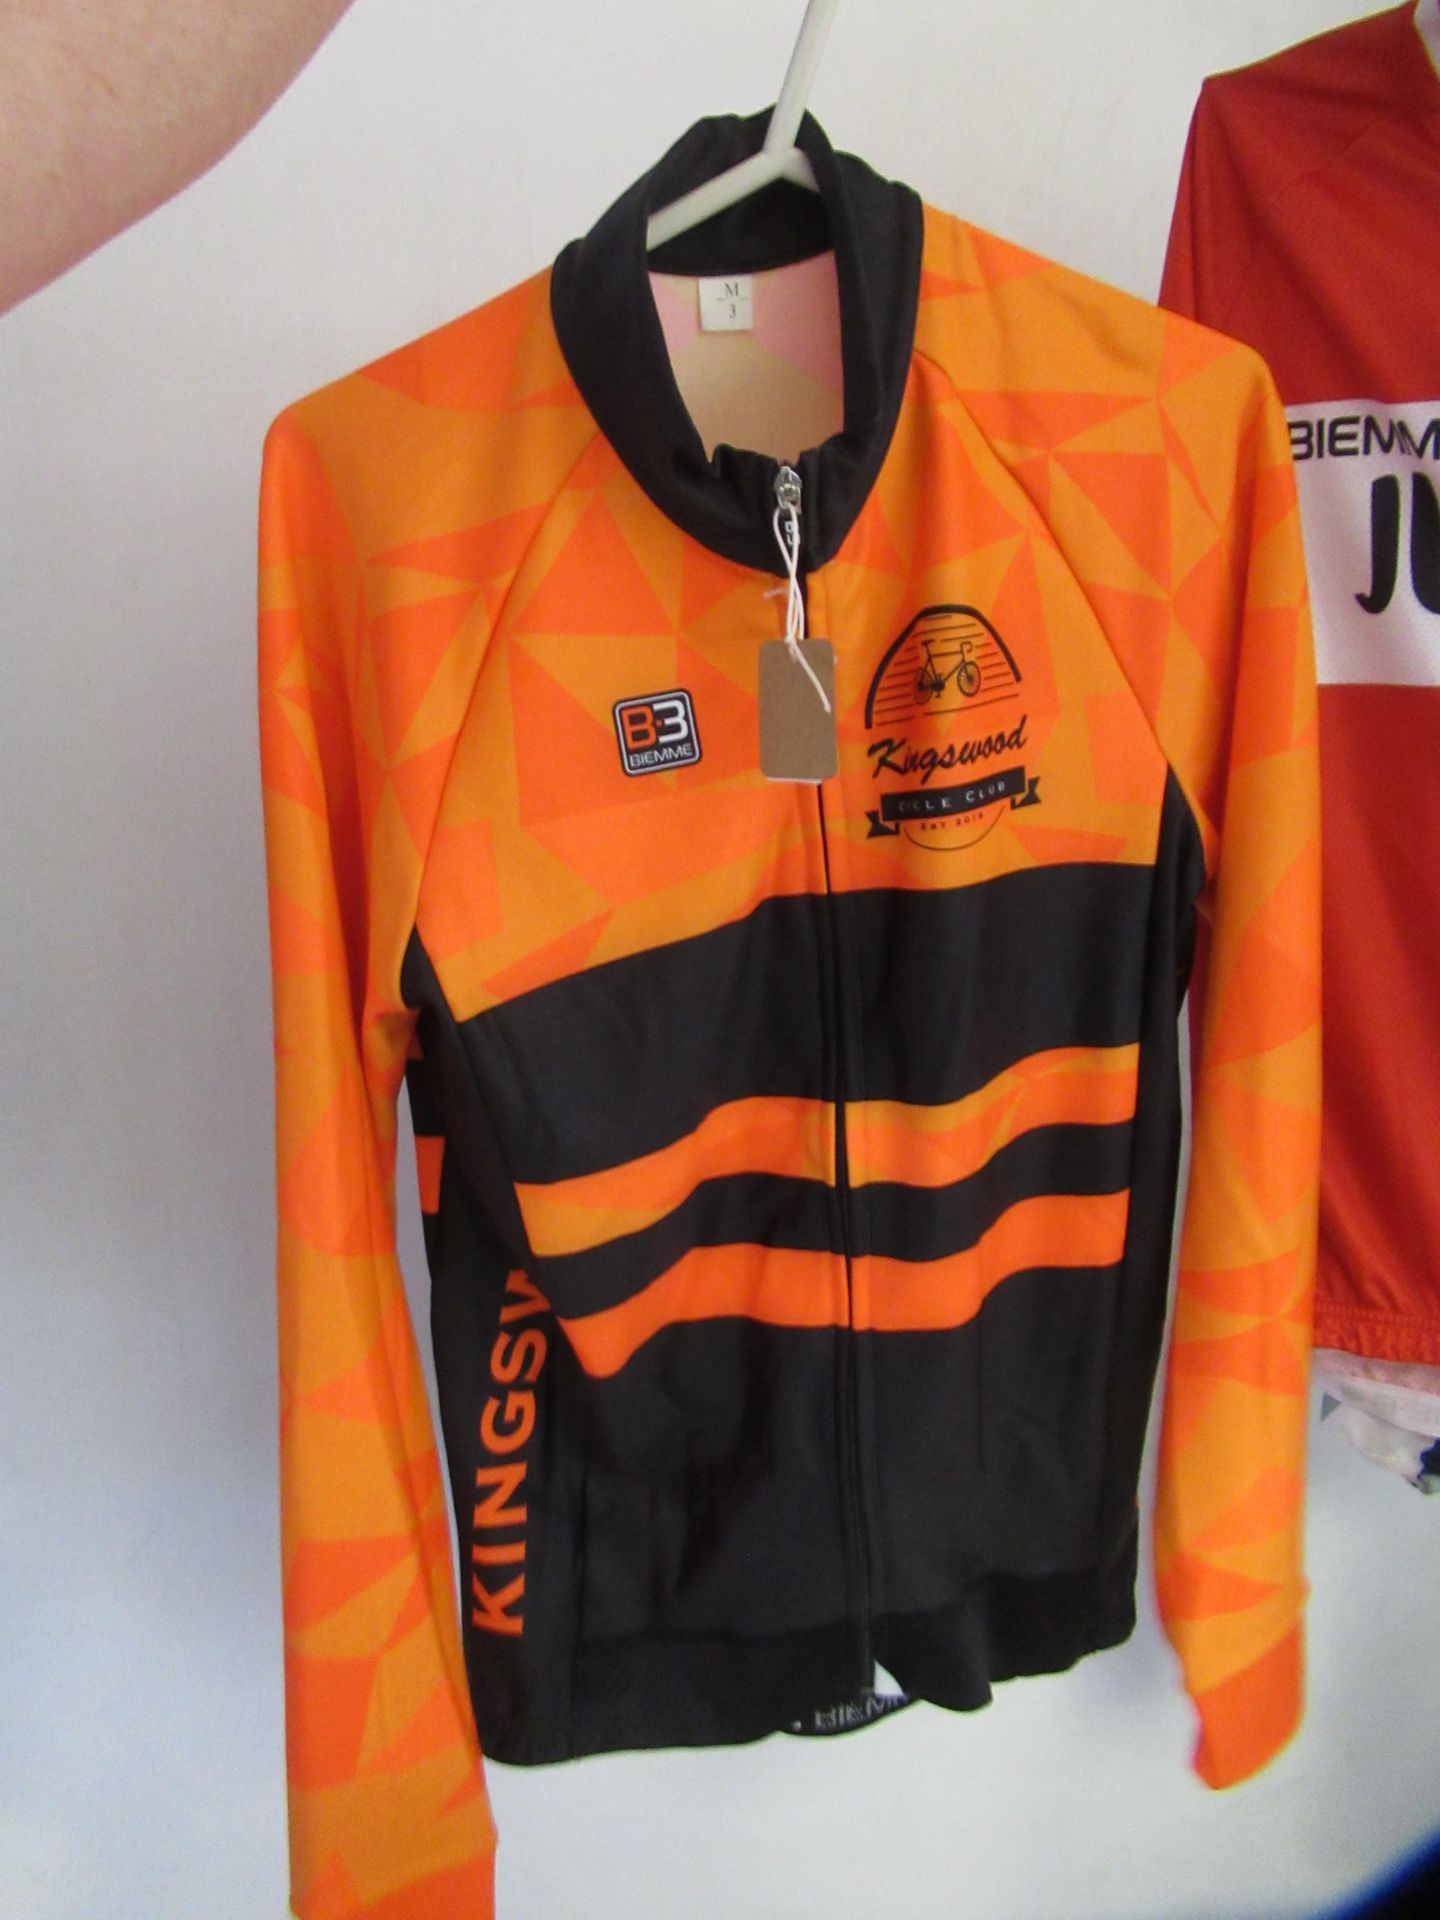 M Biemme Male Cycling Clothes - Image 6 of 8